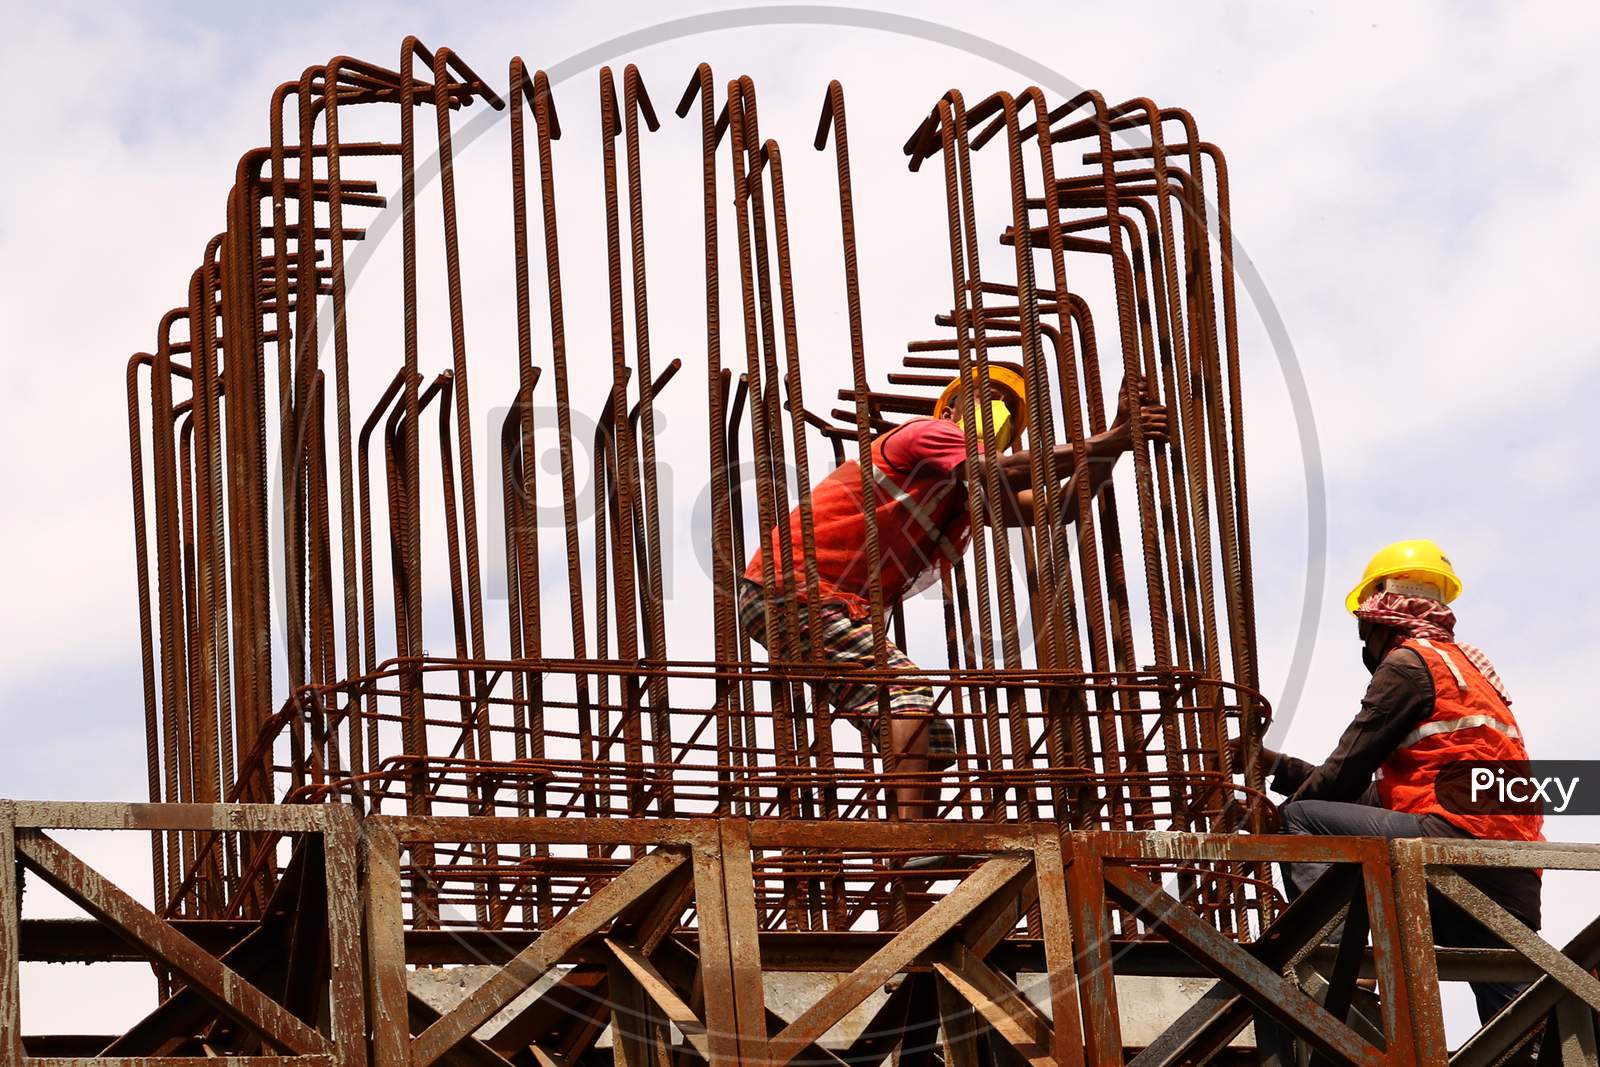 Daily Labourer Work On A Construction Site During A Government-Imposed Nationwide Lockdown As A Preventive Measure Against The Covid-19 Coronavirus, In Ajmer, Rajasthan, India On May 13, 2020.